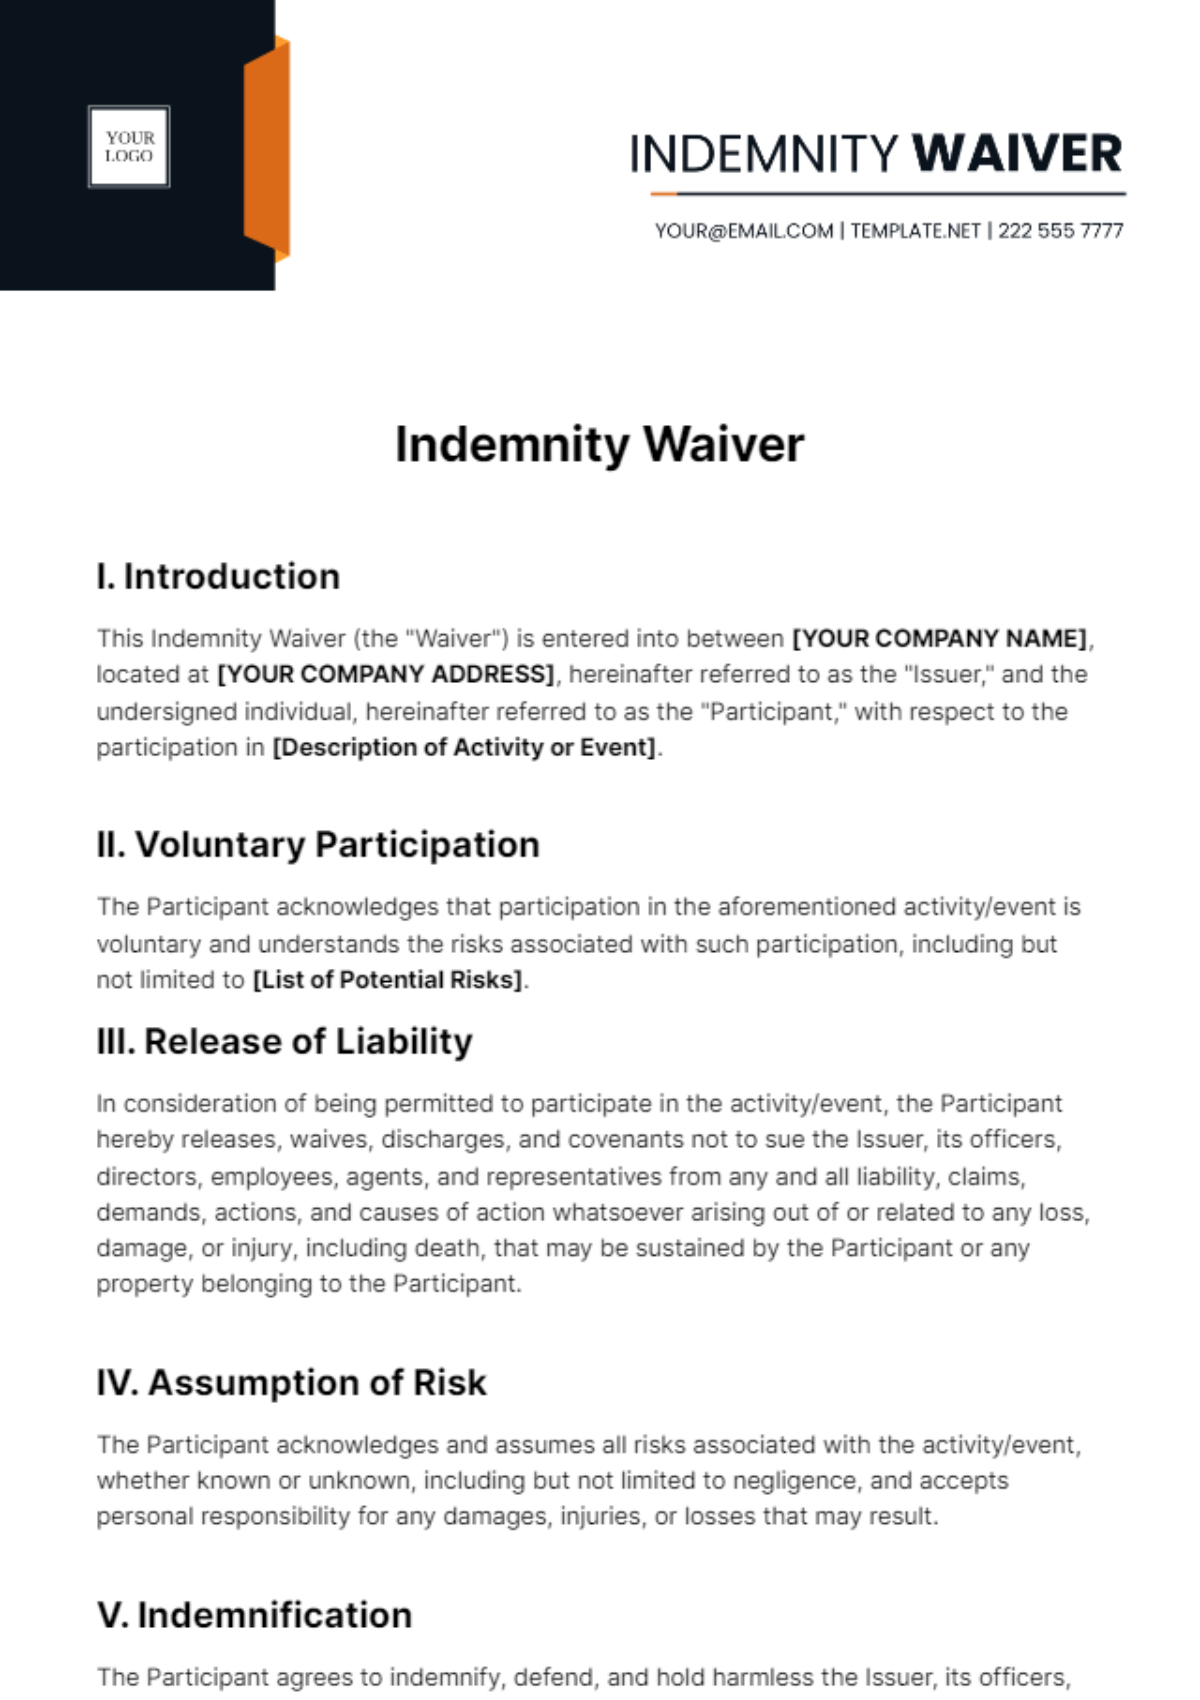 Indemnity Waiver Template